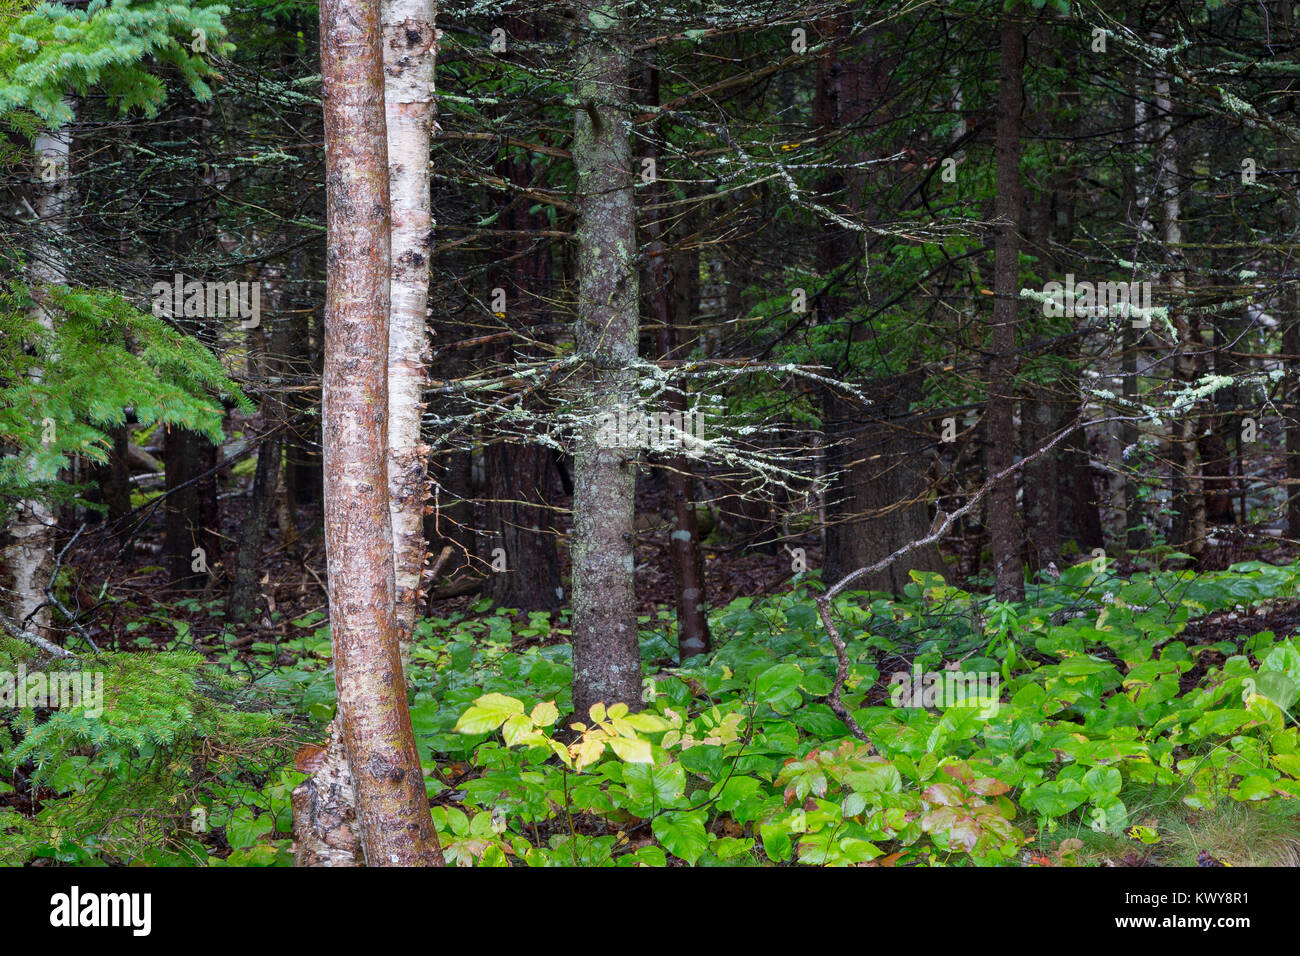 A dense forest carpeted with ground leaves and plants creating an abstract composition. Acadia National Park, Maine Stock Photo